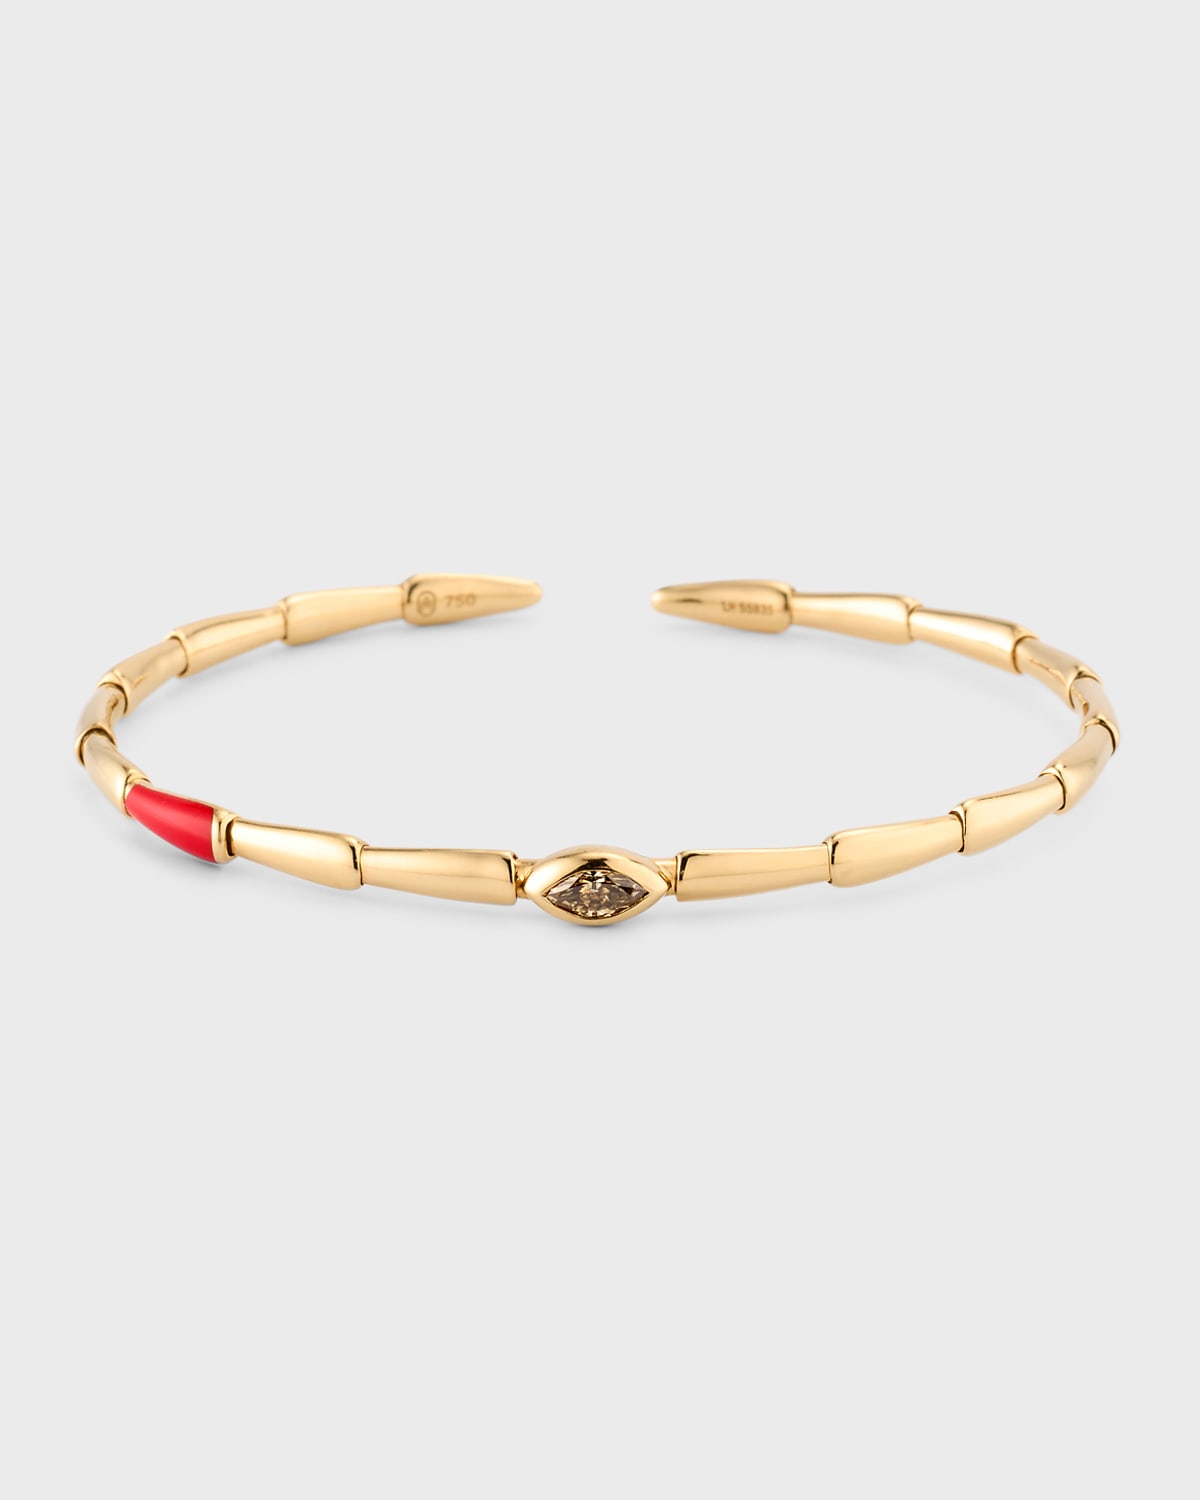 18K Yellow Gold Flex Bracelet with Brown Diamond and Red Ceramic